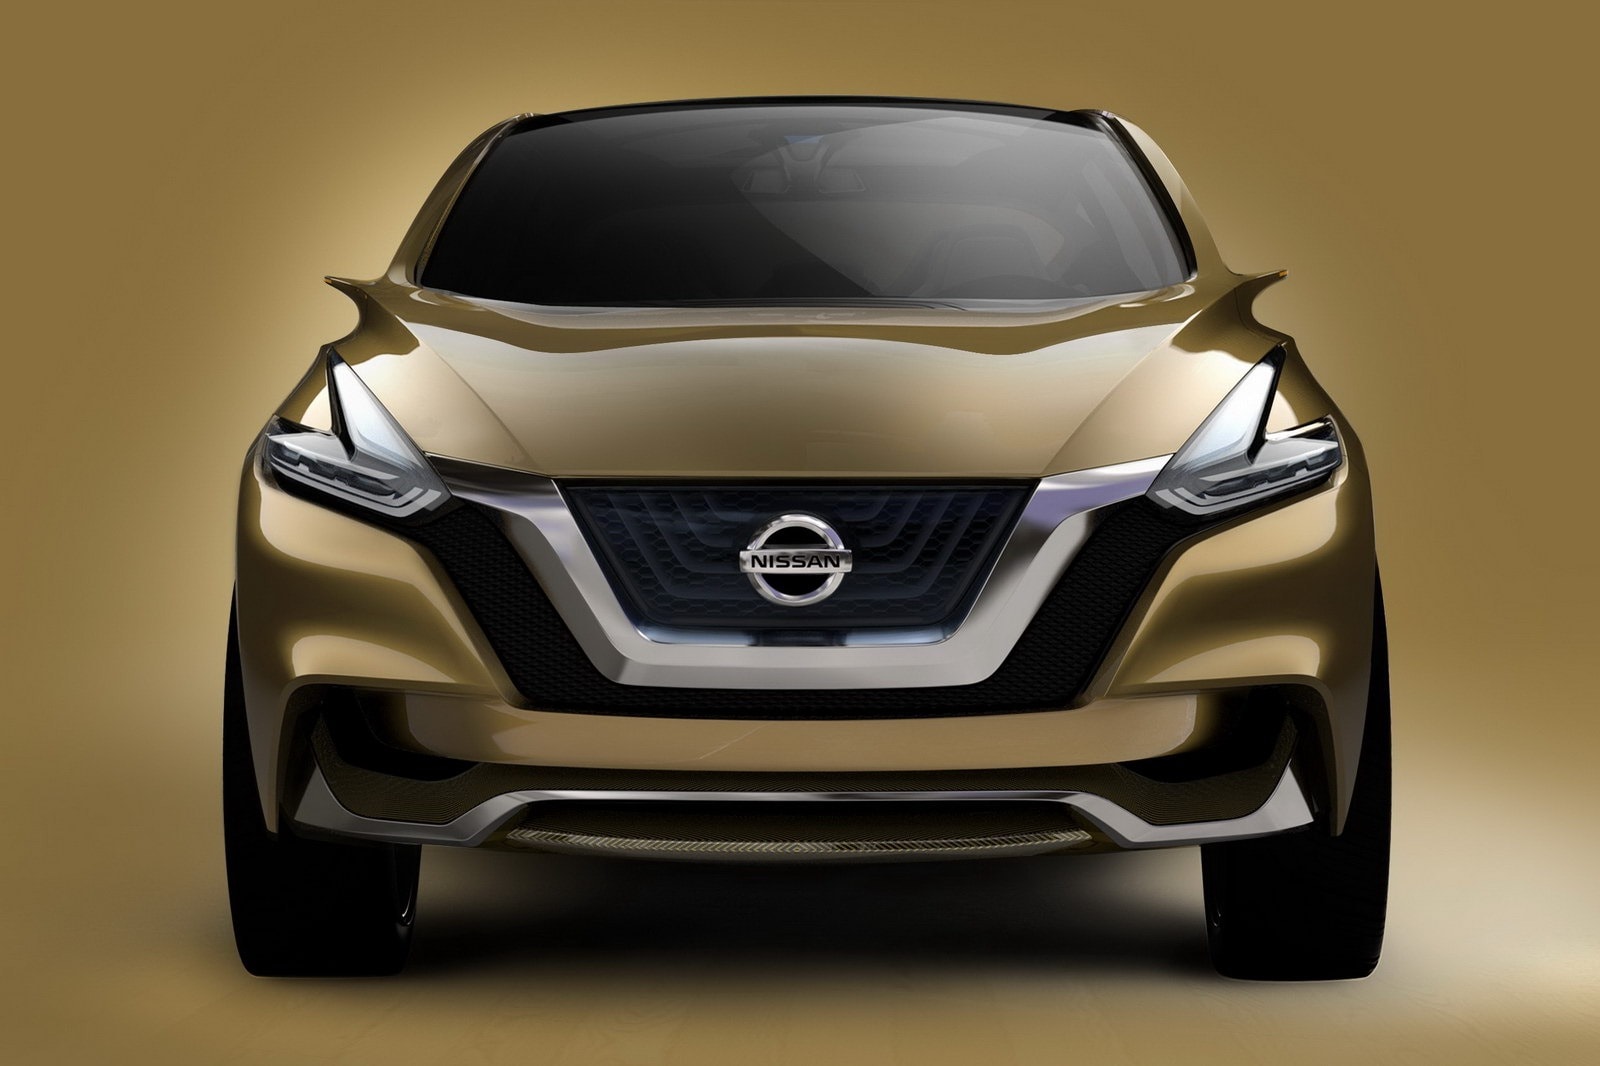 When is the new nissan murano coming out